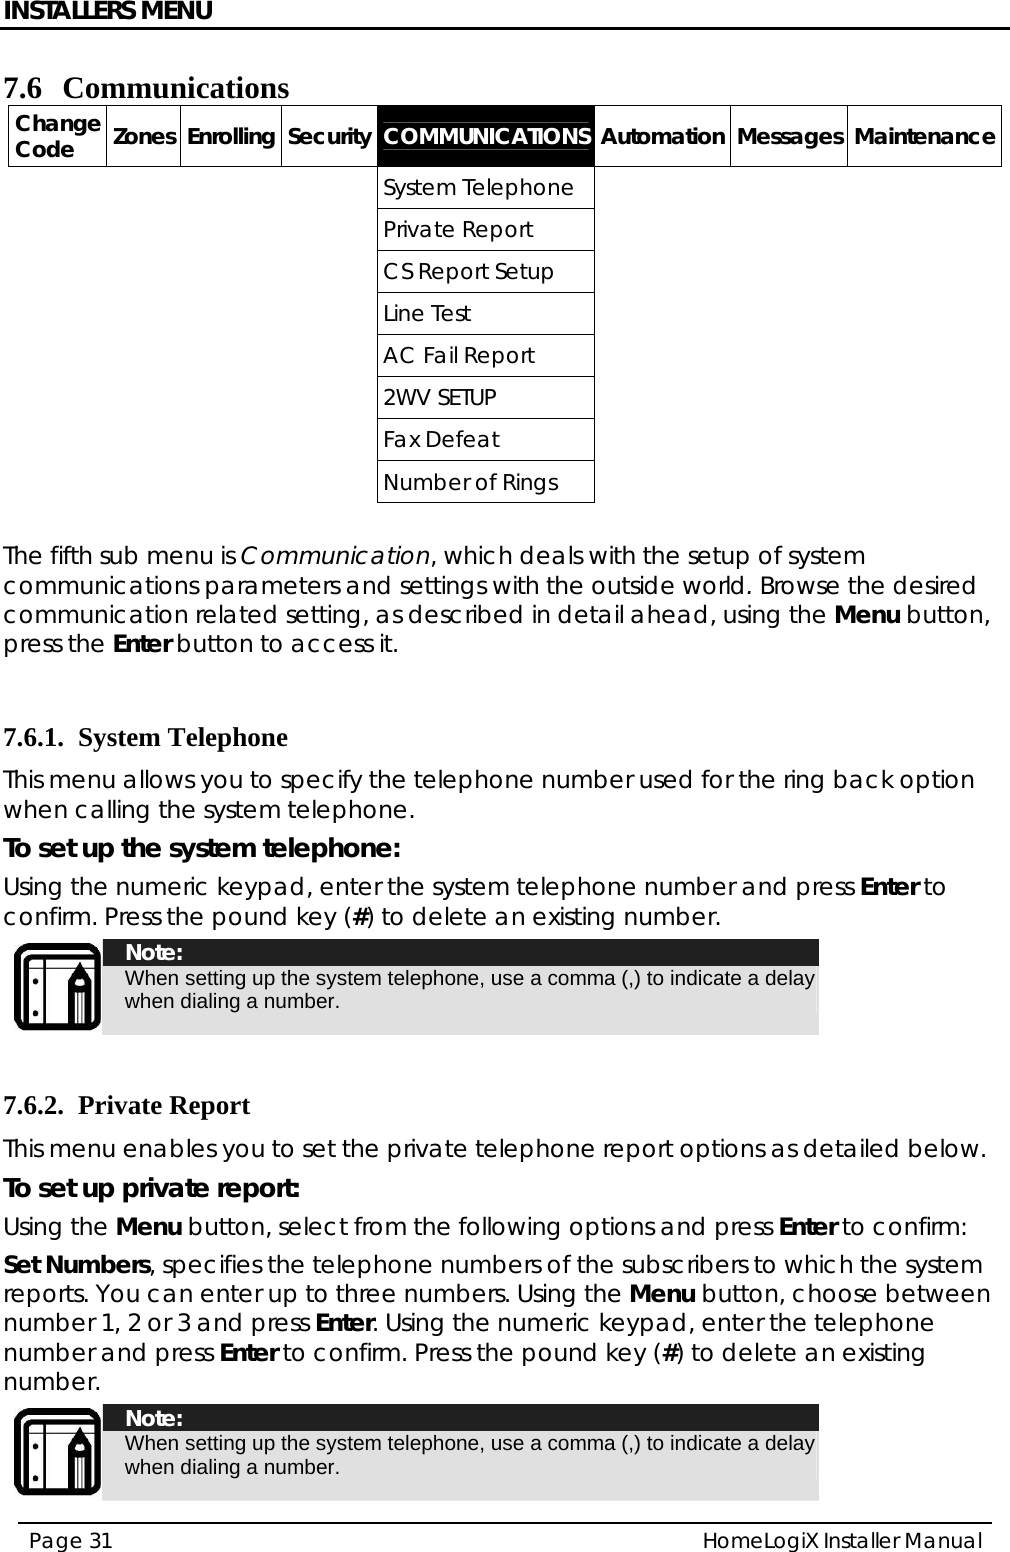 INSTALLERS MENU HomeLogiX Installer Manual Page 31  7.6 Communications Change Code  Zones Enrolling Security COMMUNICATIONS Automation Messages Maintenance     System Telephone          Private Report              CS Report Setup            Line Test               AC Fail Report           2WV SETUP           Fax Defeat          Number of Rings       The fifth sub menu is Communication, which deals with the setup of system communications parameters and settings with the outside world. Browse the desired communication related setting, as described in detail ahead, using the Menu button, press the Enter button to access it.  7.6.1. System Telephone This menu allows you to specify the telephone number used for the ring back option when calling the system telephone. To set up the system telephone: Using the numeric keypad, enter the system telephone number and press Enter to confirm. Press the pound key (#) to delete an existing number.  Note: When setting up the system telephone, use a comma (,) to indicate a delay when dialing a number.  7.6.2. Private Report This menu enables you to set the private telephone report options as detailed below. To set up private report: Using the Menu button, select from the following options and press Enter to confirm: Set Numbers, specifies the telephone numbers of the subscribers to which the system reports. You can enter up to three numbers. Using the Menu button, choose between number 1, 2 or 3 and press Enter. Using the numeric keypad, enter the telephone number and press Enter to confirm. Press the pound key (#) to delete an existing number.  Note: When setting up the system telephone, use a comma (,) to indicate a delay when dialing a number. 